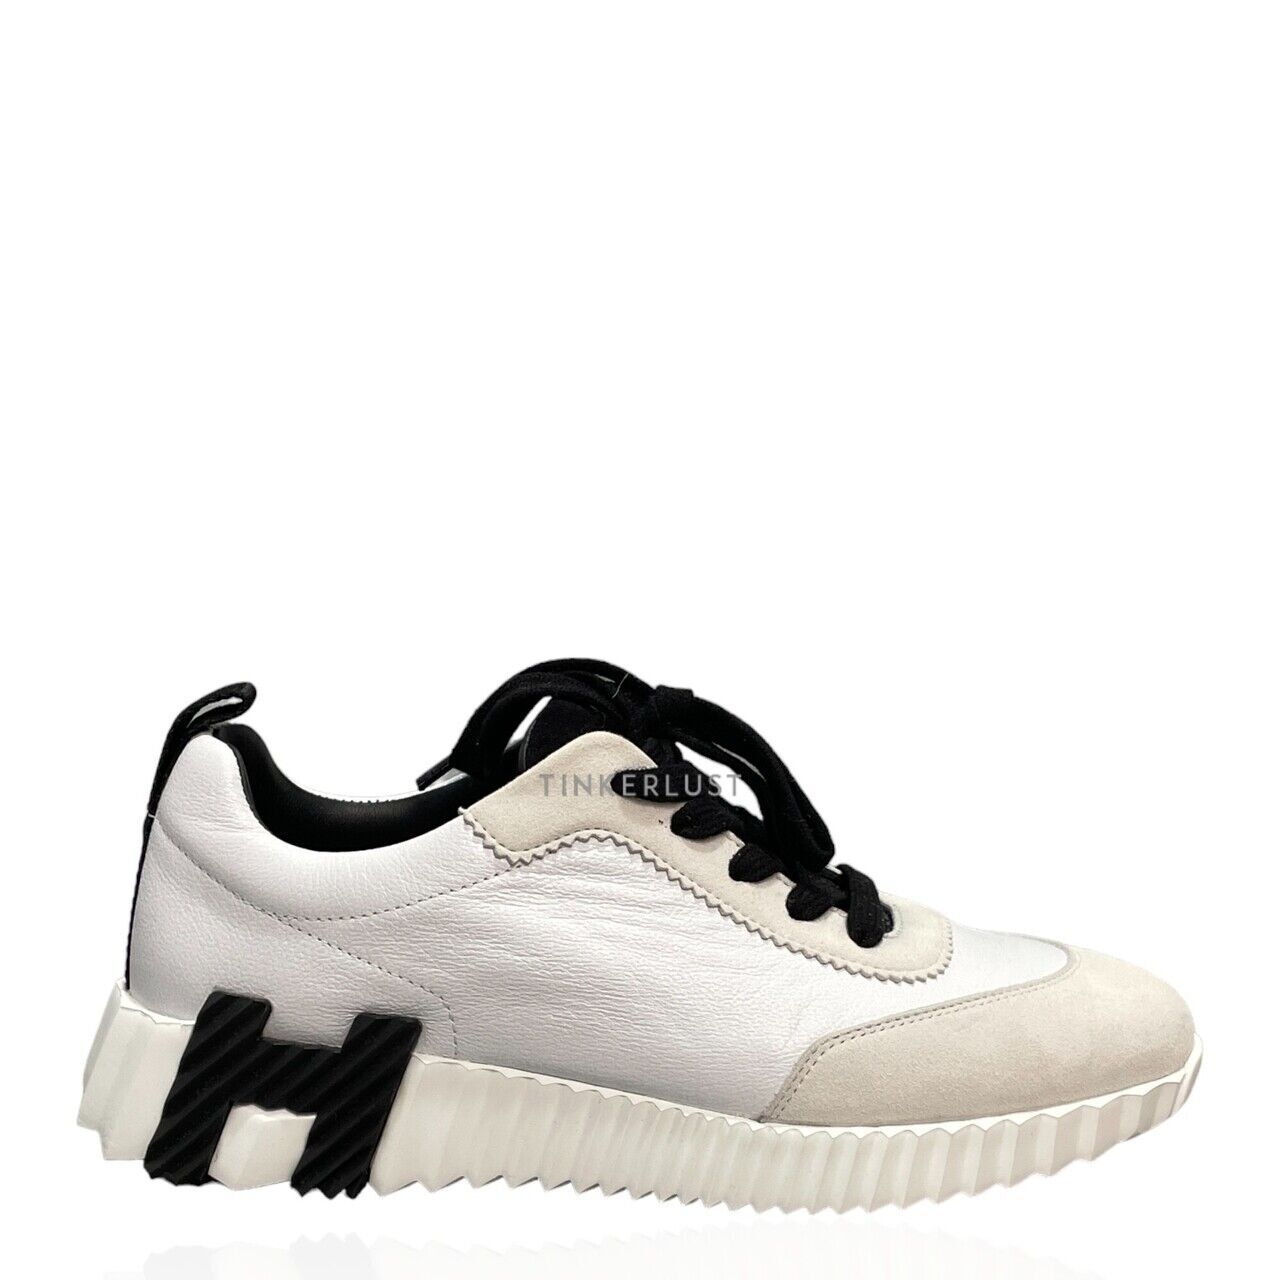 Hermes Femme Bouncing in Goatskin & Suede Goatskin White and Black Sneakers